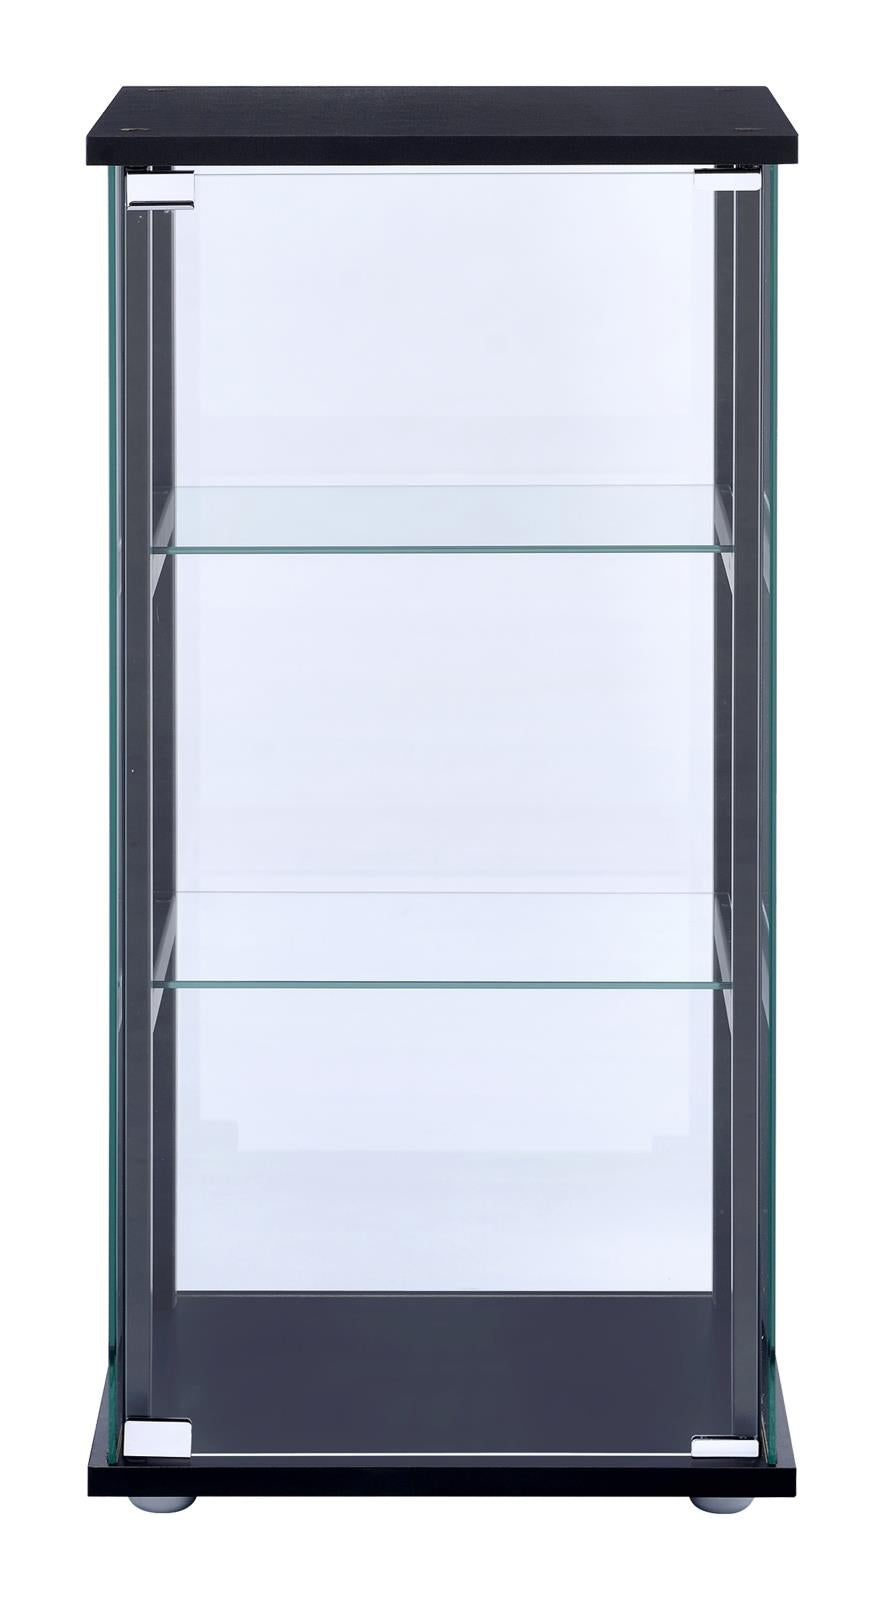 3-shelf Glass Curio Cabinet Black and Clear - What A Room